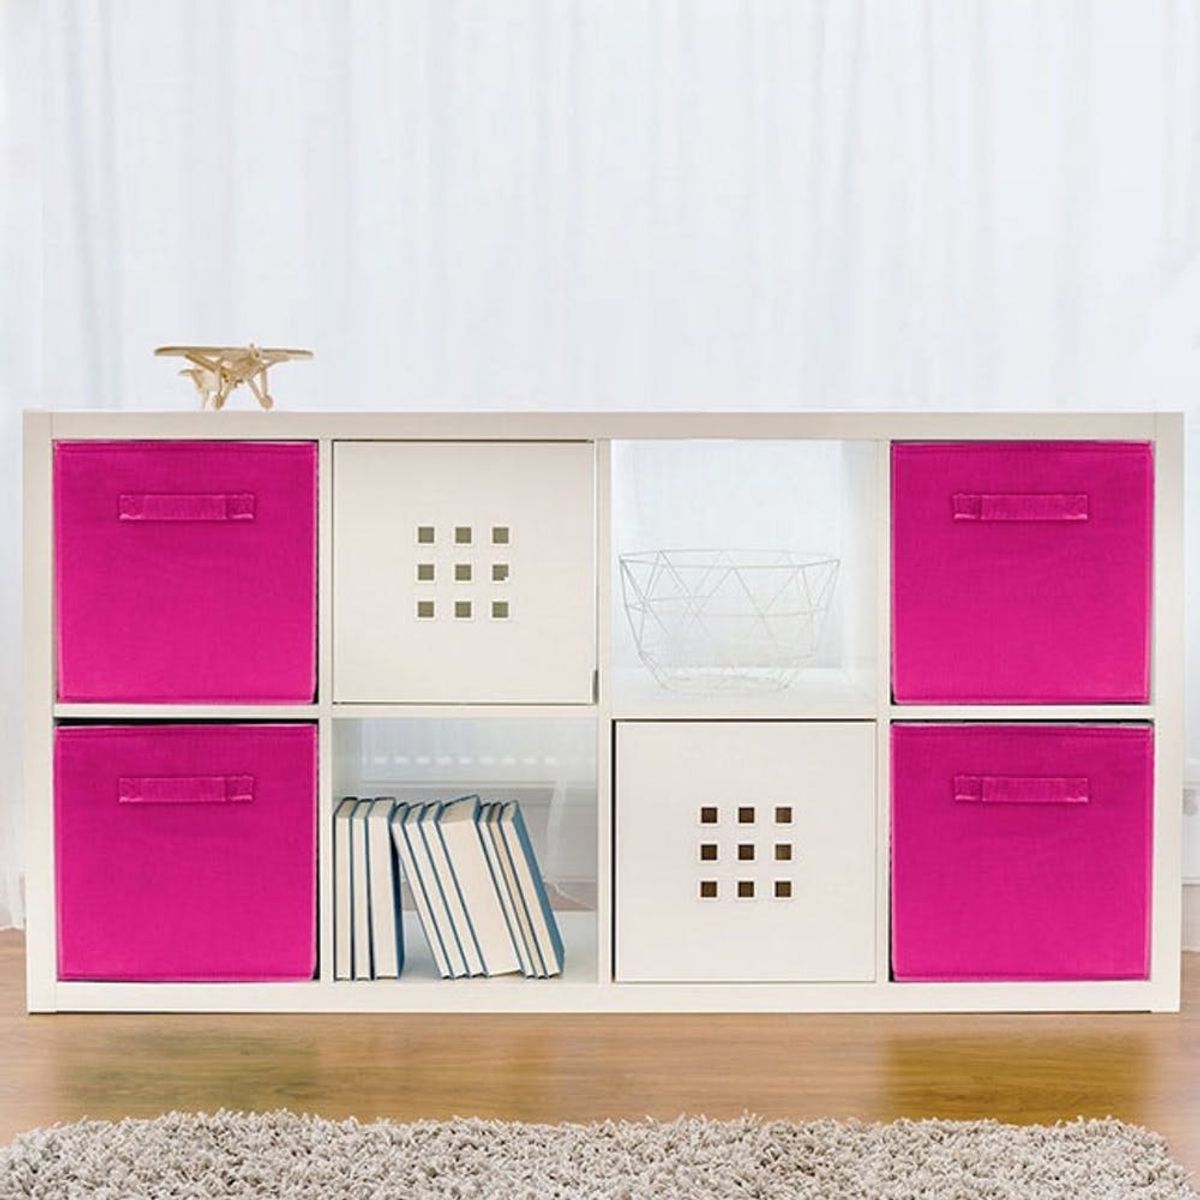 13 Products to Help You Be More Organized Than Ever